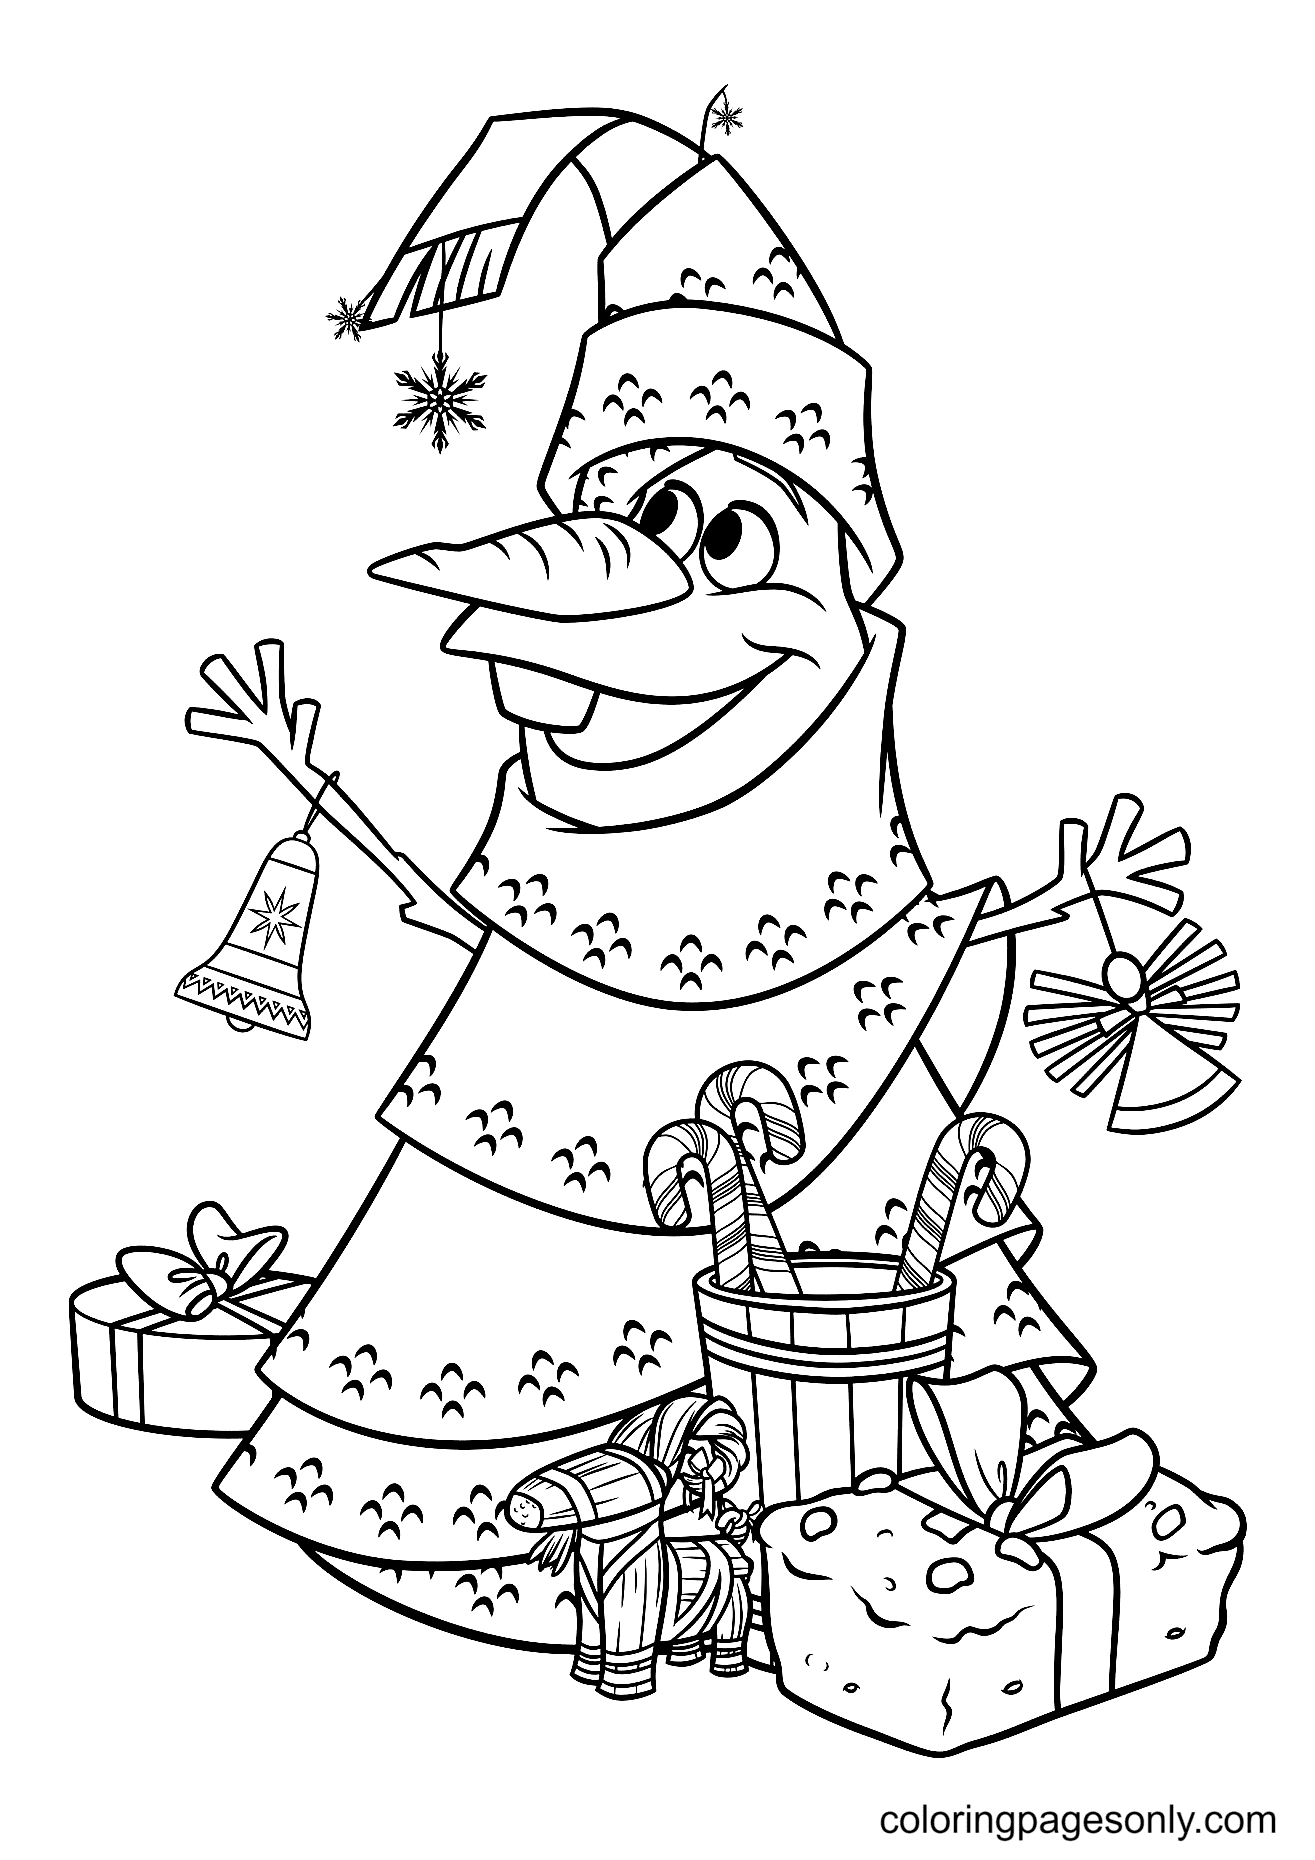 Olaf Christmas Tree Coloring Pages